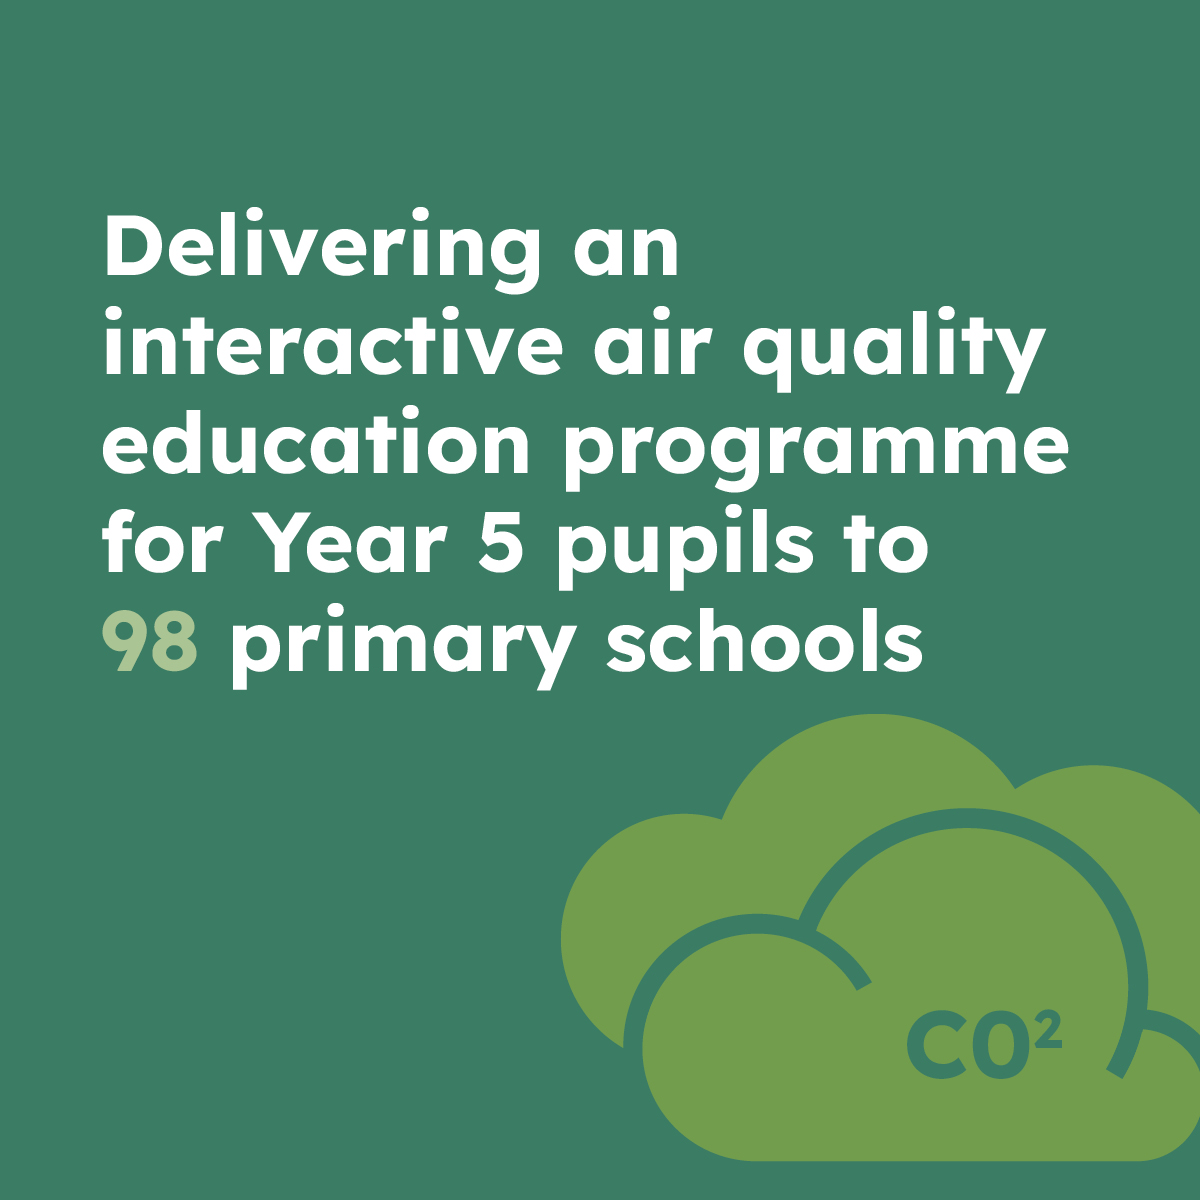 Delivering an interactive air quality education programme for Year 5 pupils to 98 primary schools